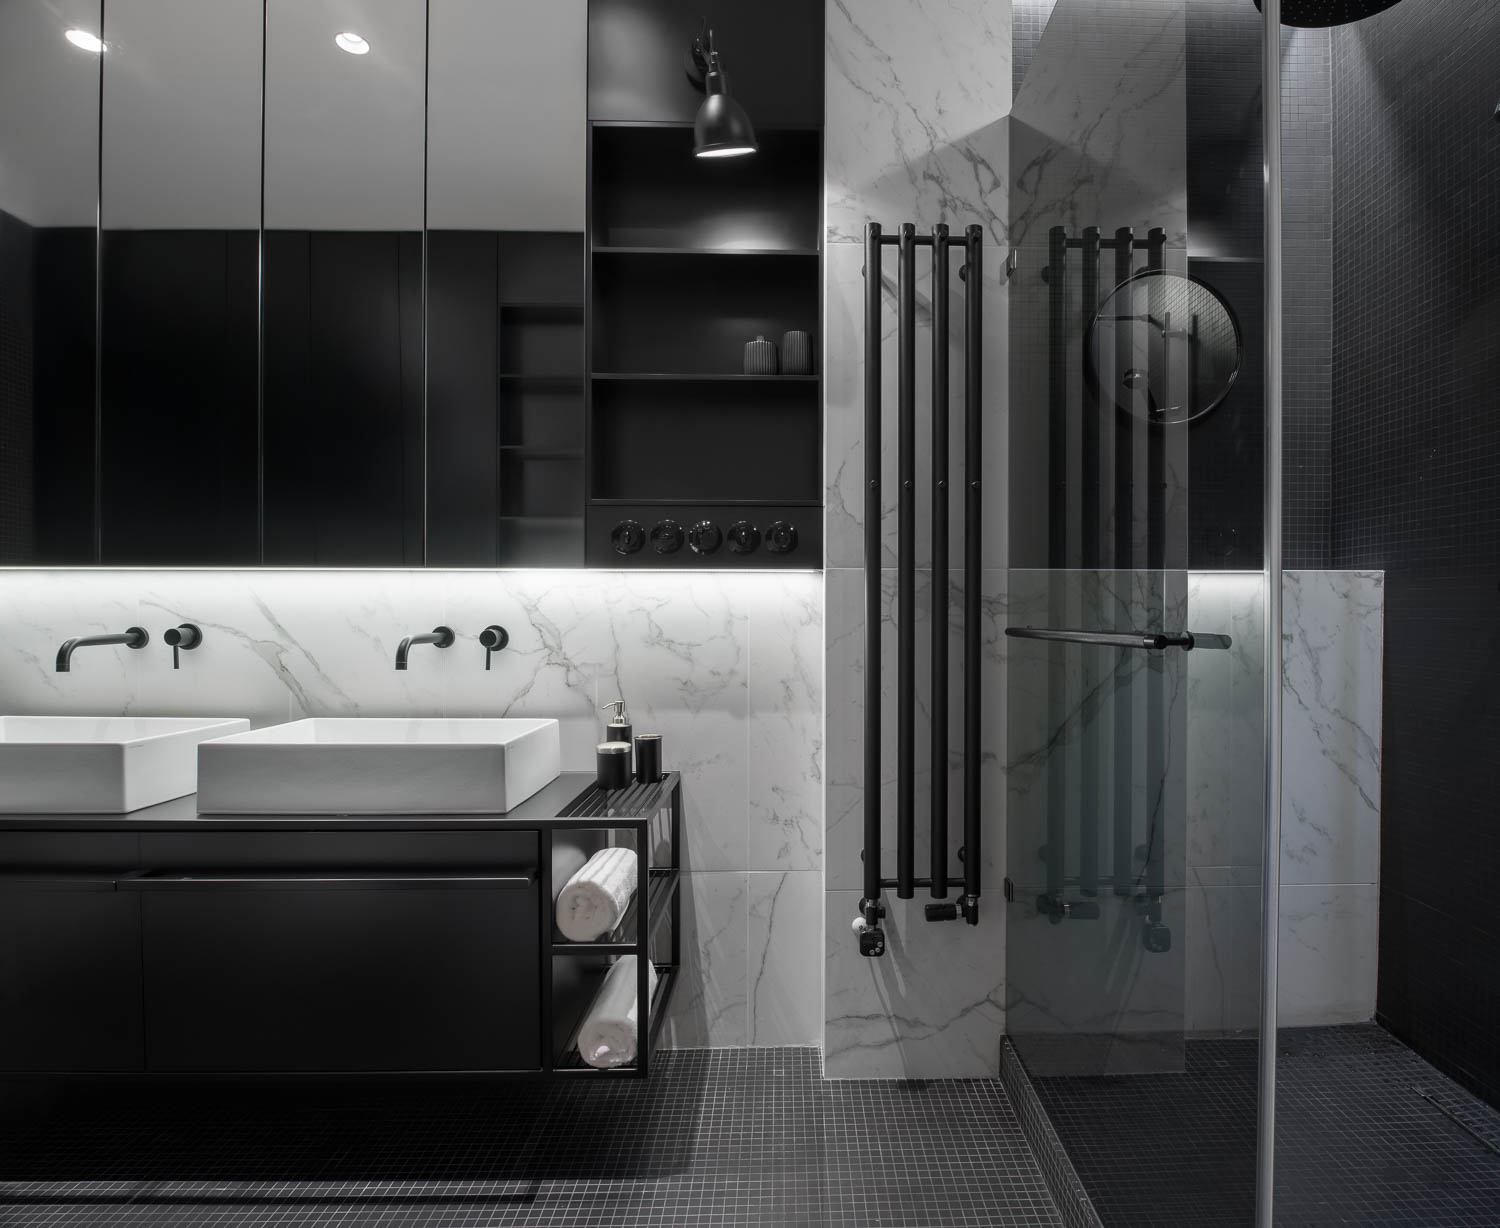 #BATHROOM as a Place of Relaxation